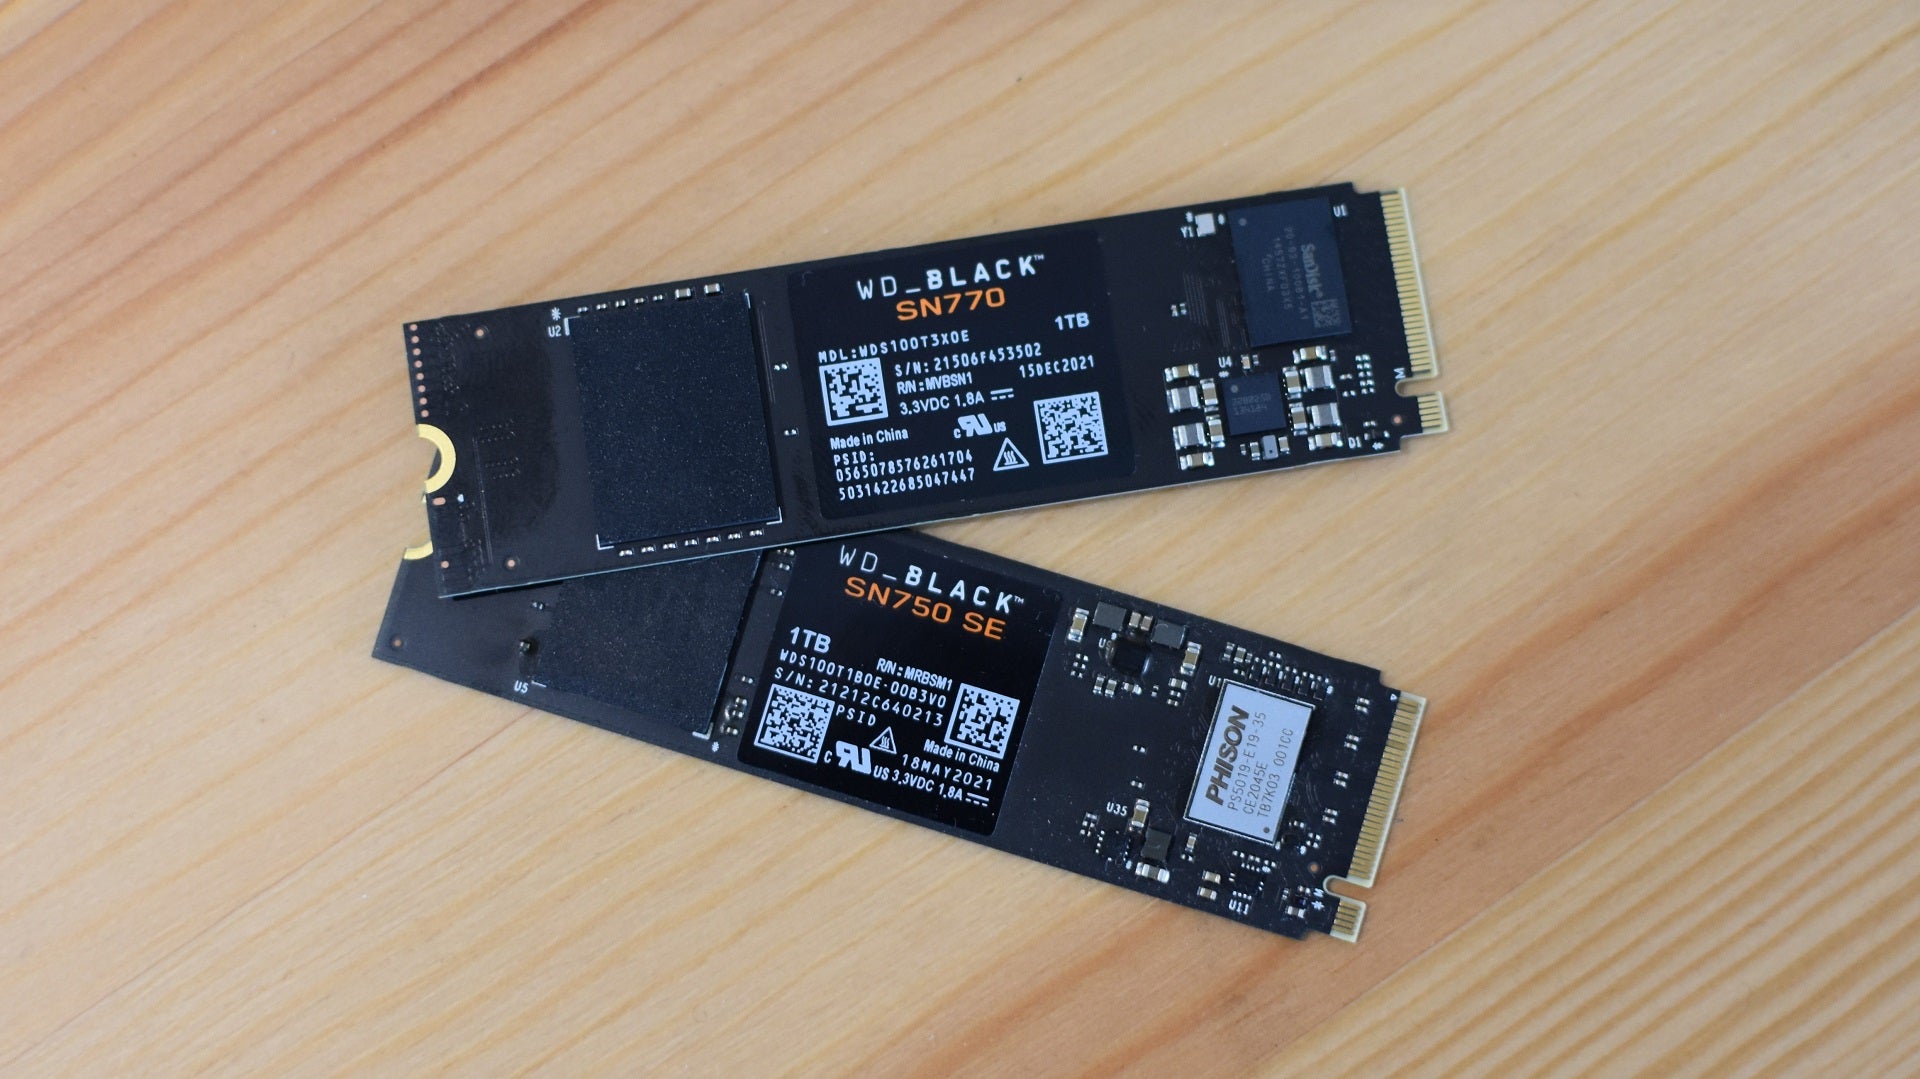 The WD Black SN770 SSD next to the WD Black SN750 SE.